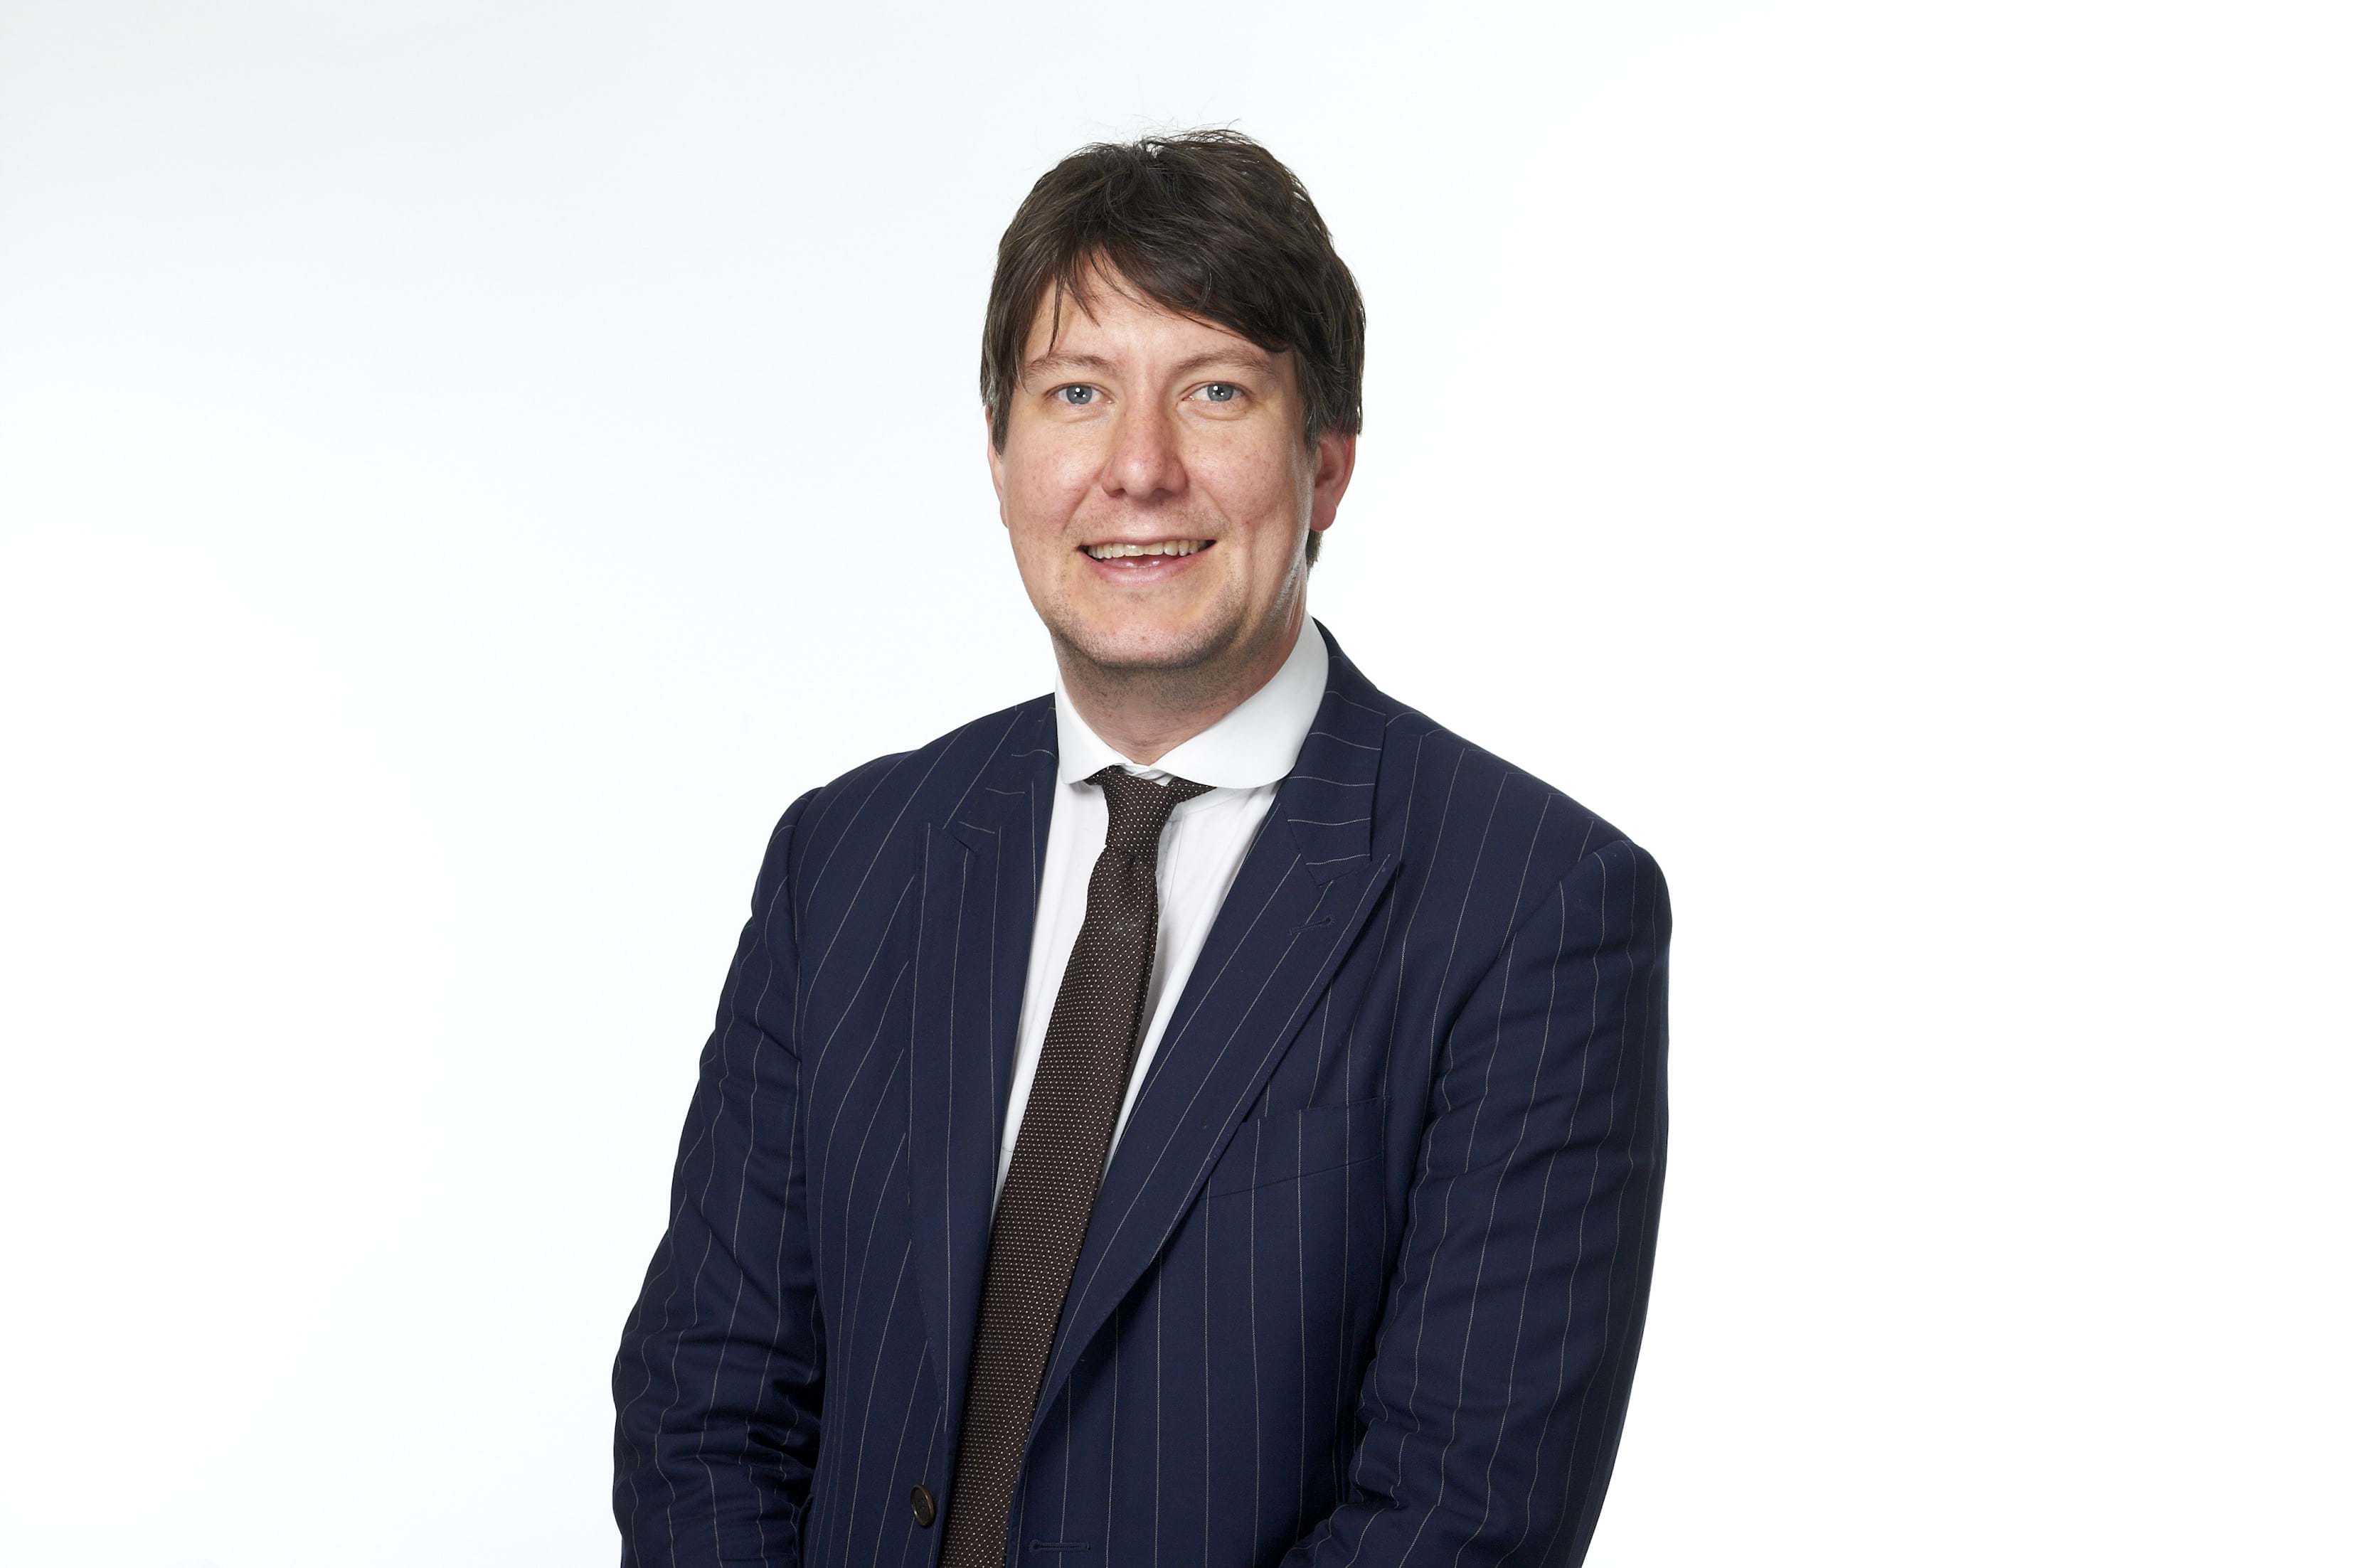 Christian Harbinson, a member of the professional misconduct and criminal law team, based in Thompsons Solicitors’ Newcastle office